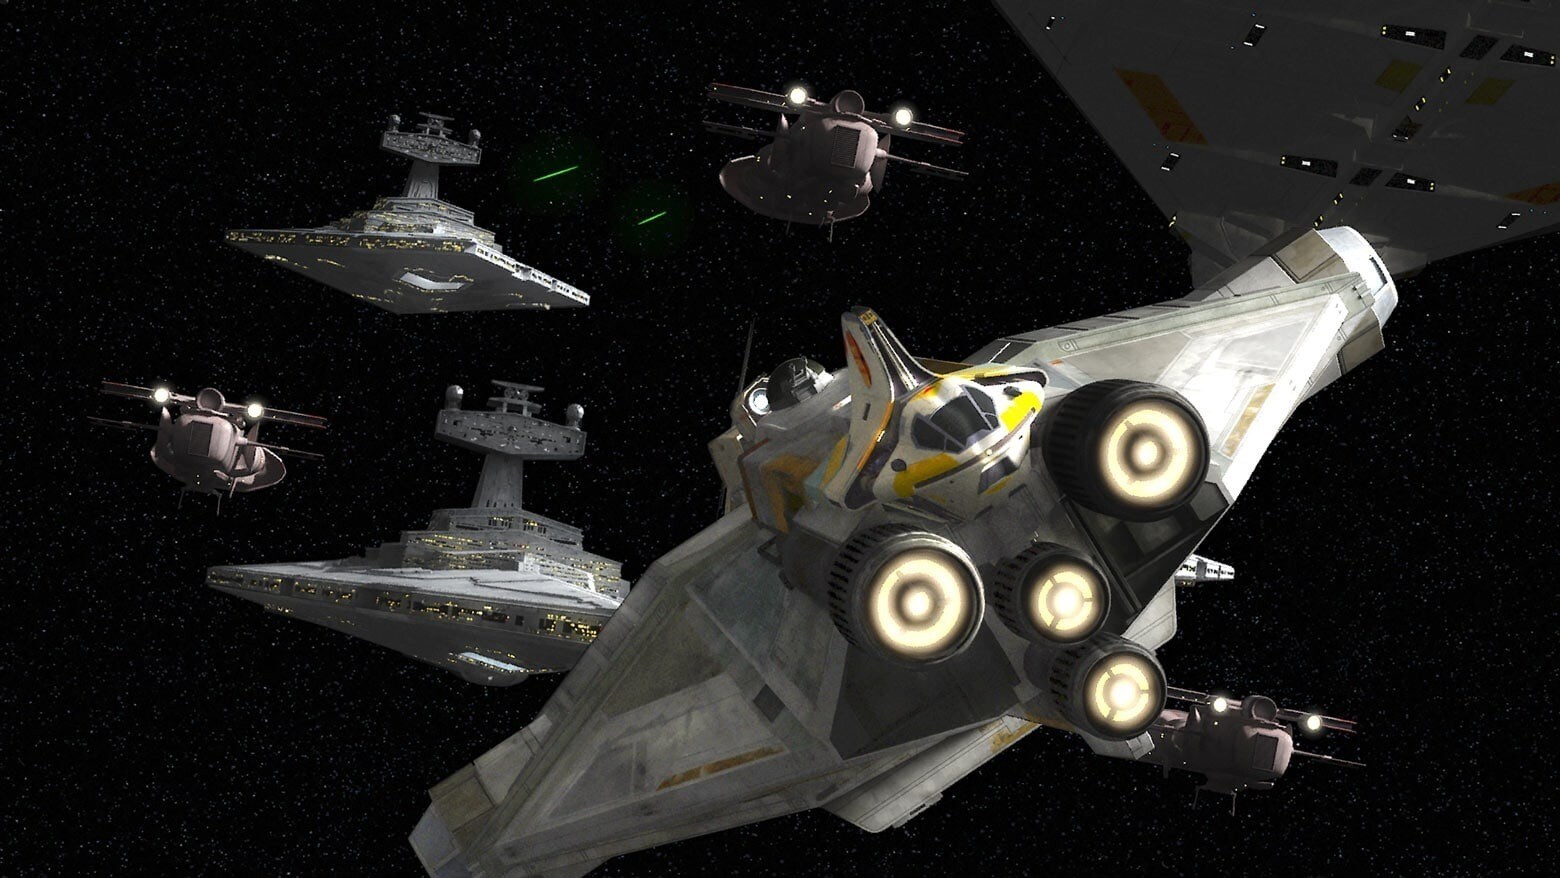 The Ghost facing off against Imperial Star Destroyers in space